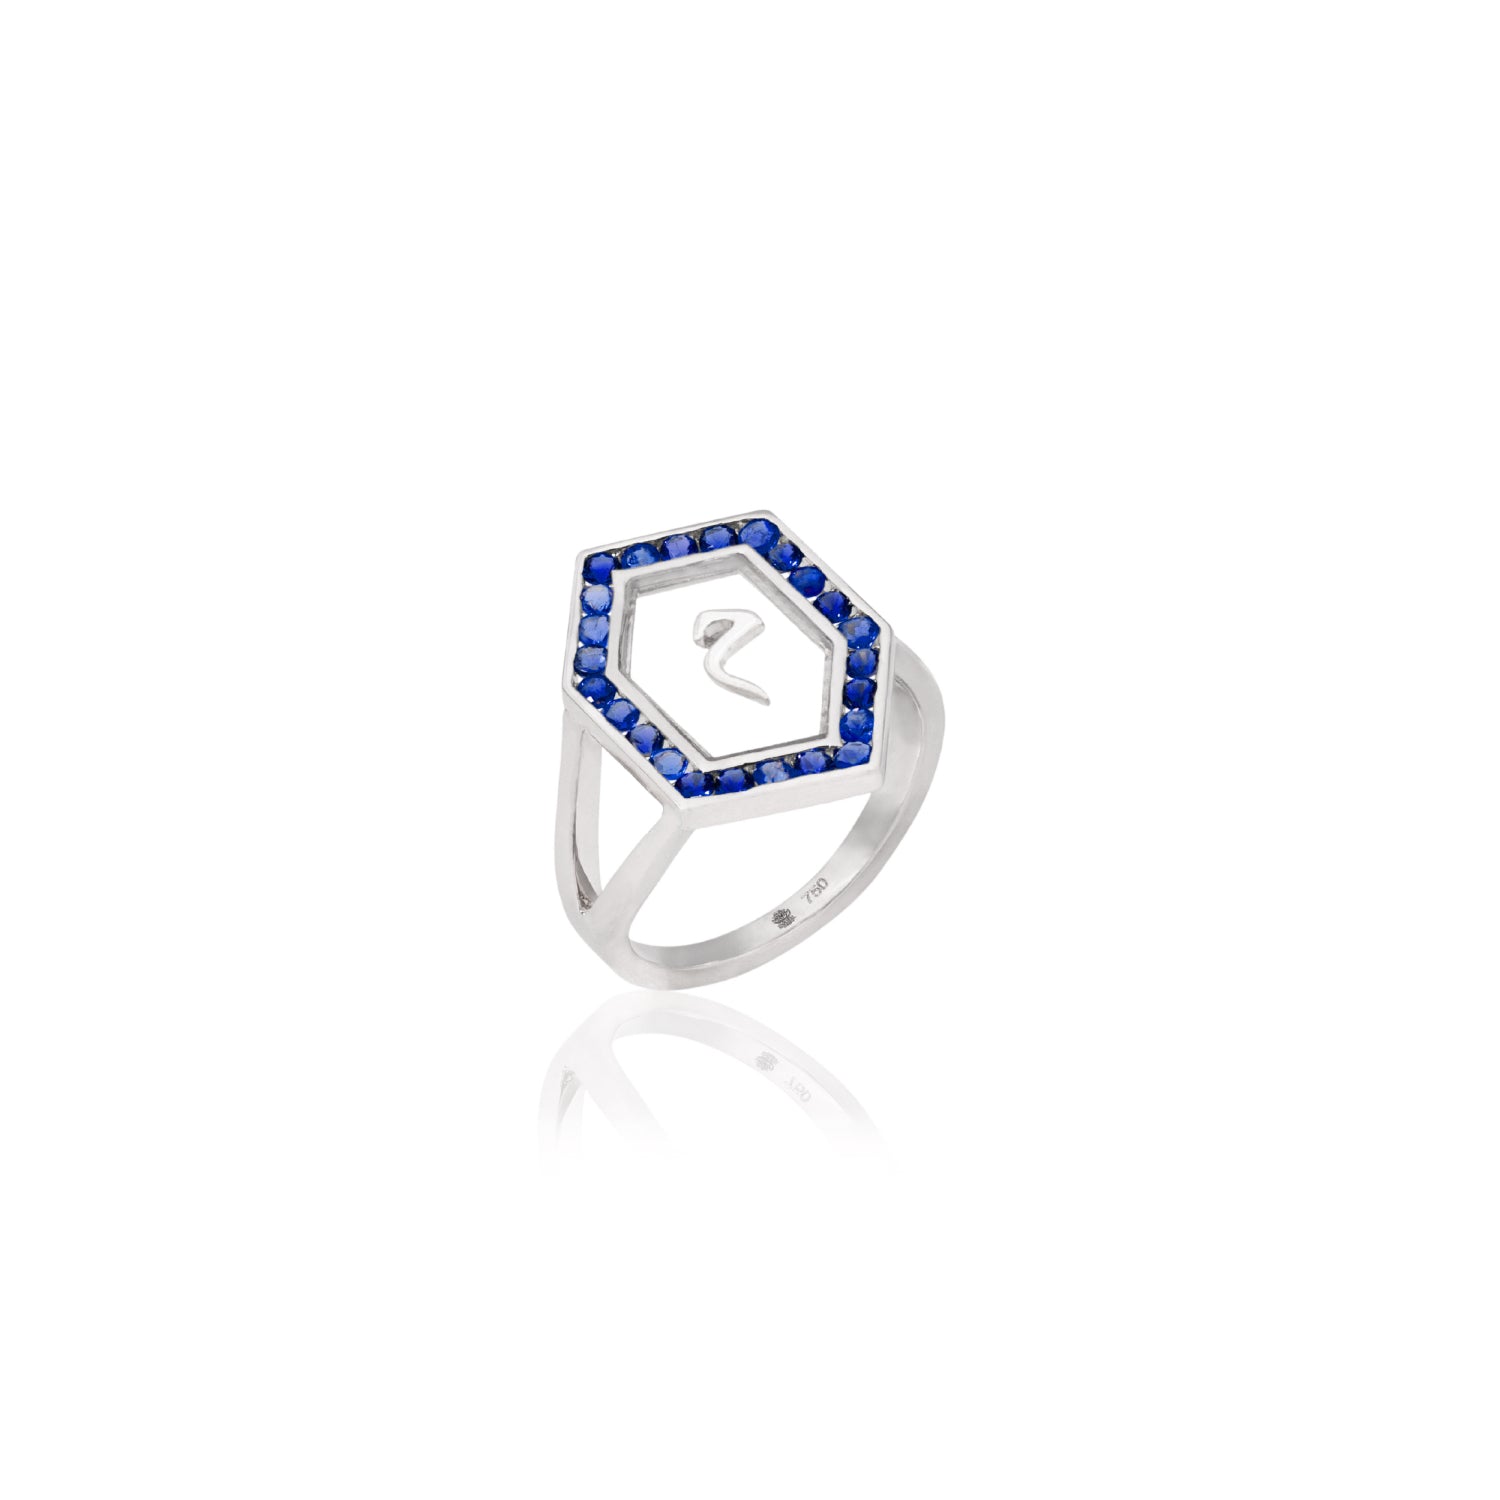 Qamoos 1.0 Letter م Sapphire Ring in White Gold